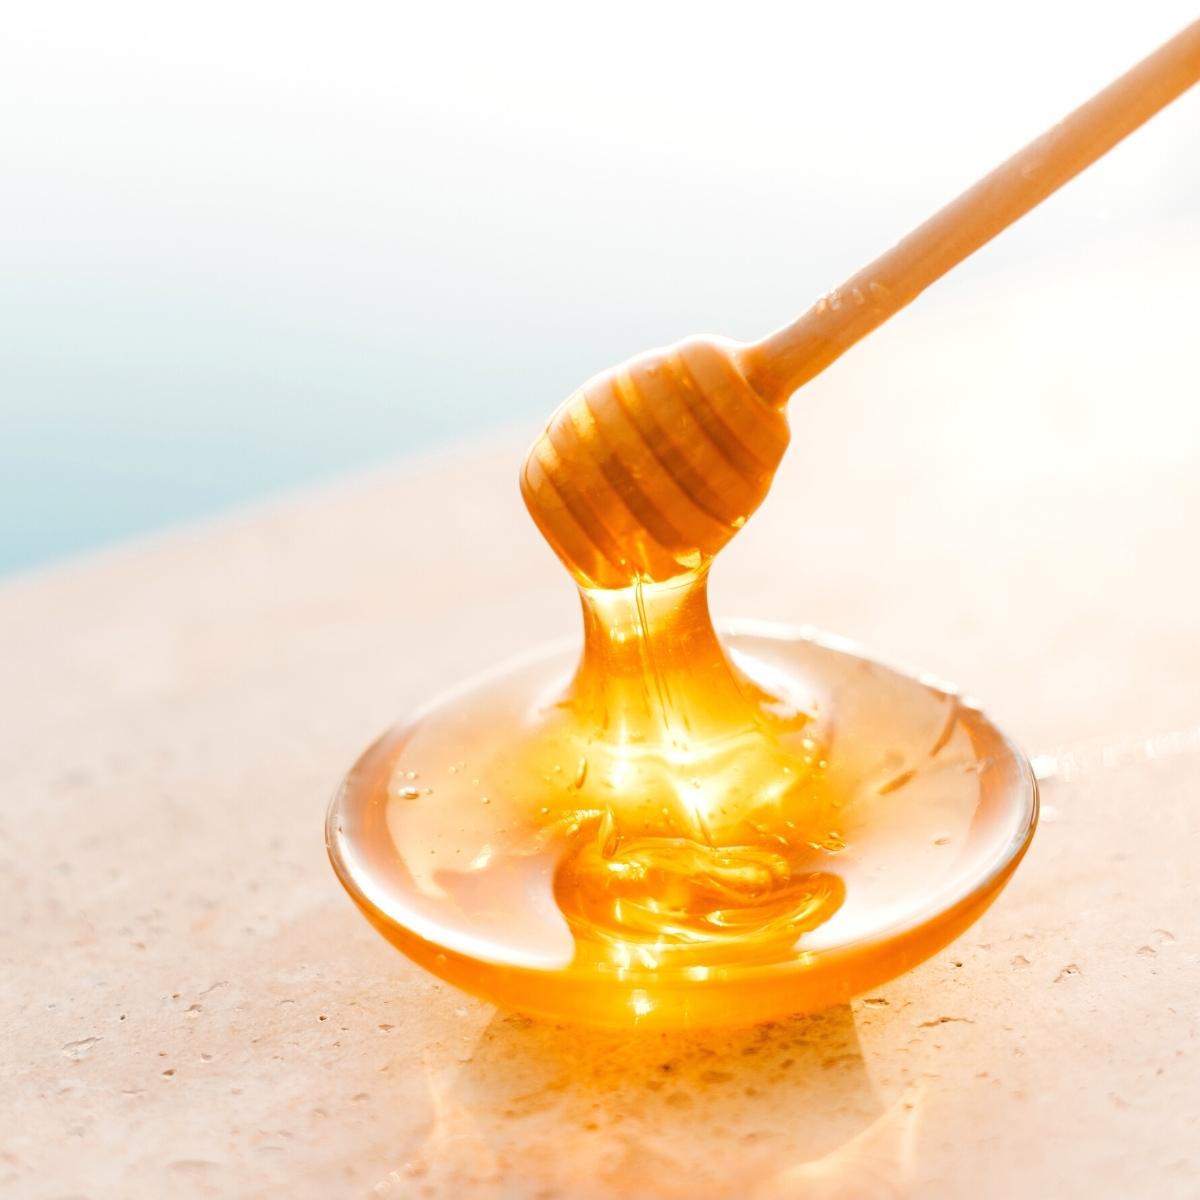 fresh raw honey dripping from a wooden honey spoon glistening in the sunlight.